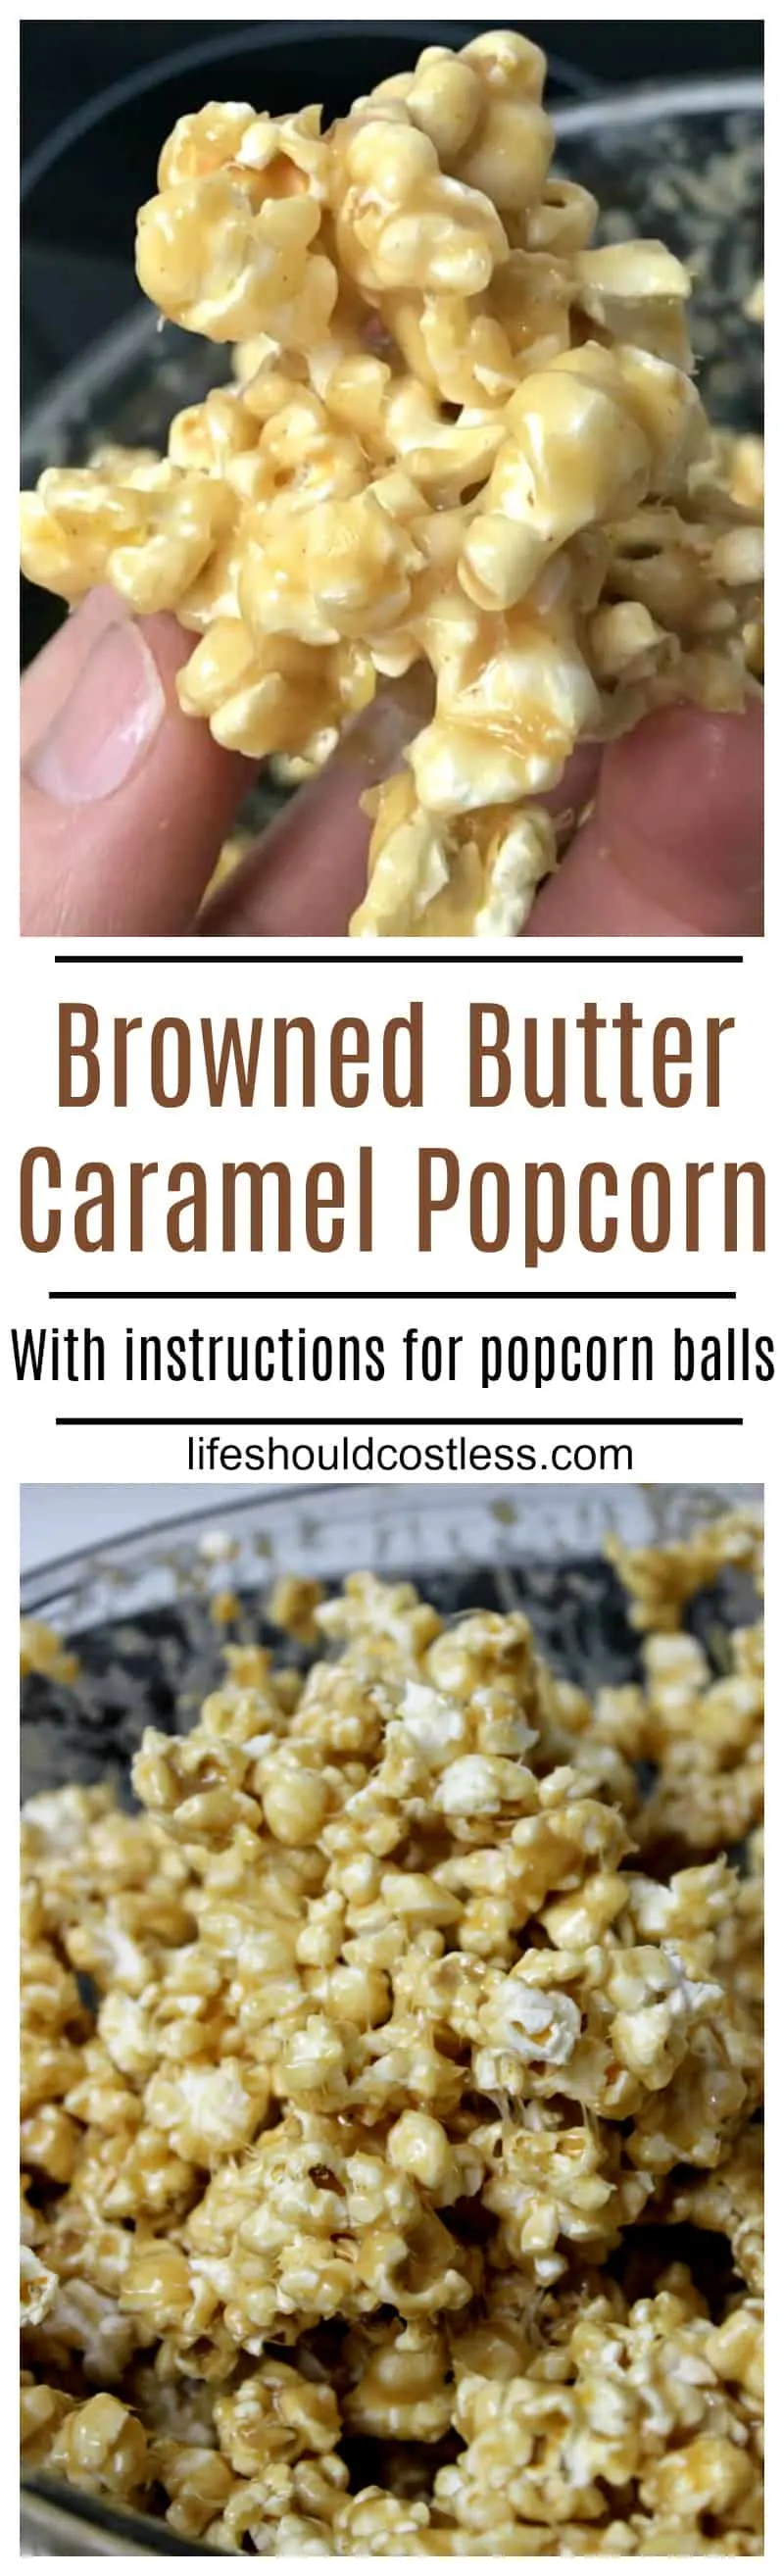 Browned Butter Caramel Popcorn, with instructions on how to make popcorn balls. It's a new twist on an old favorite at lifeshouldcostless.com